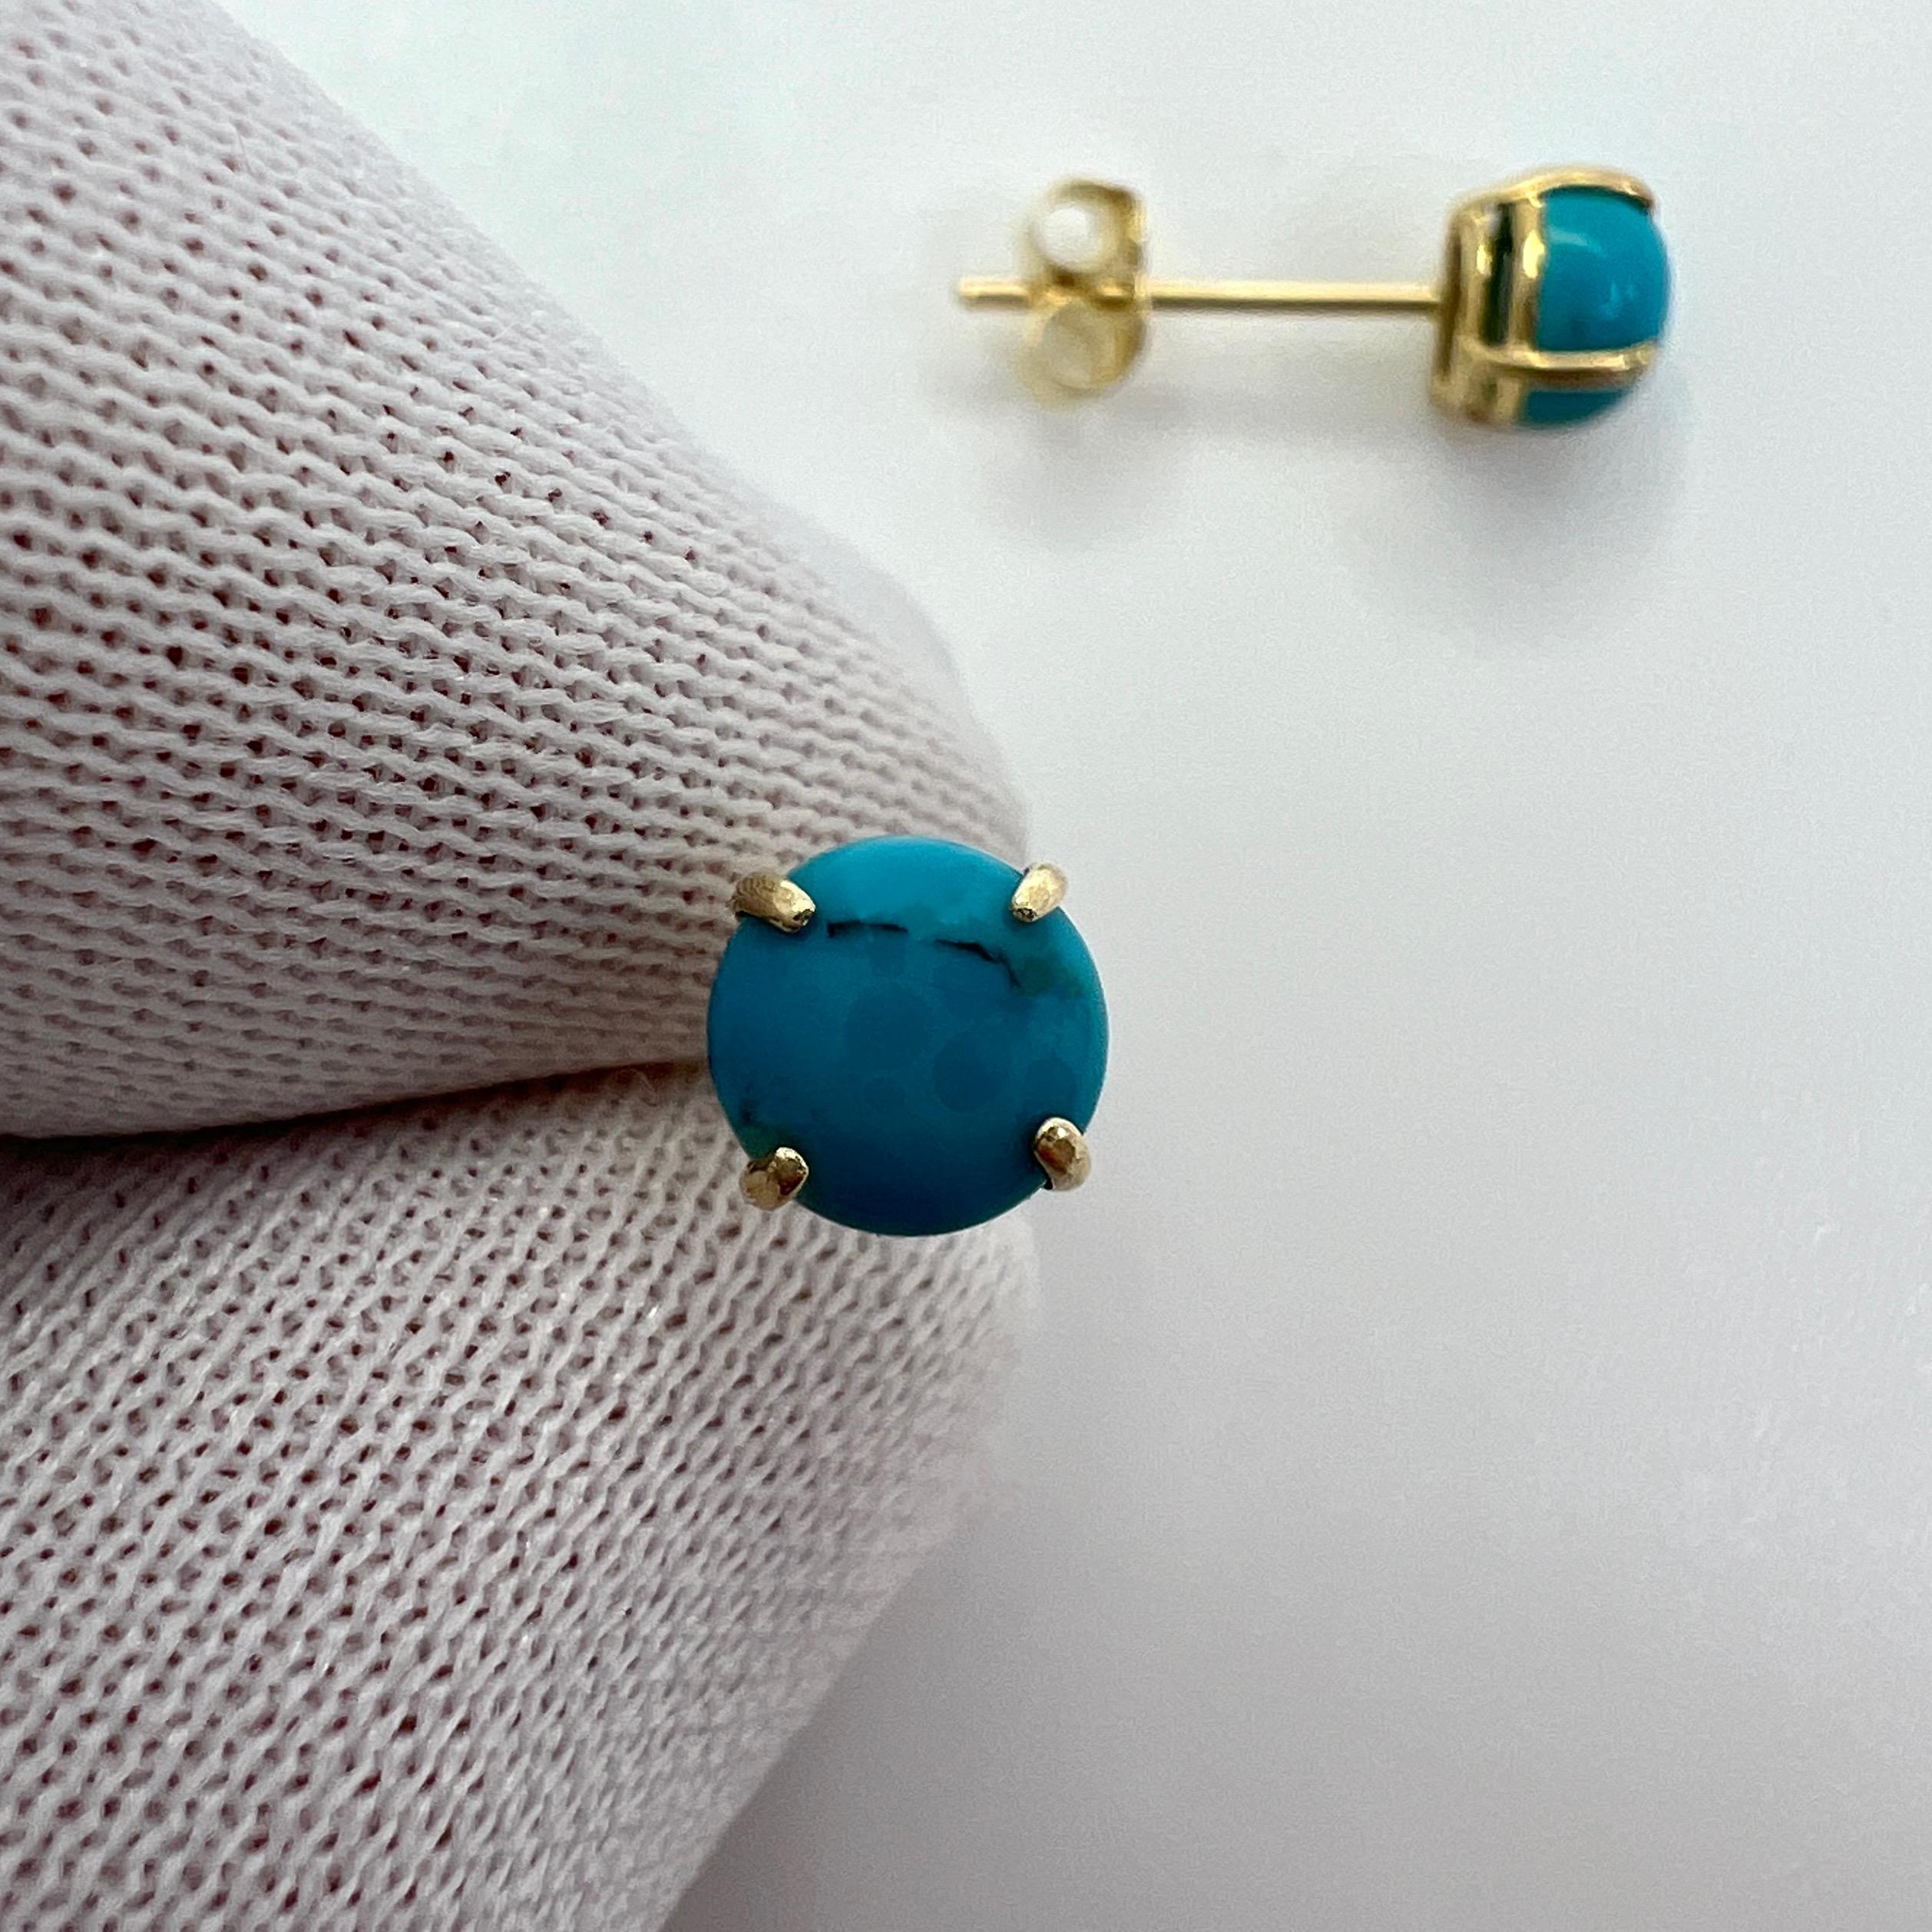 Natural Blue Turquoise Yellow Gold Earring Studs.

Beautiful 5mm matching pair of turquoise stones with excellent colour, clarity and round cabochon cut. Some showing black matrix inclusions.

The gemstones may vary slightly from the images as these